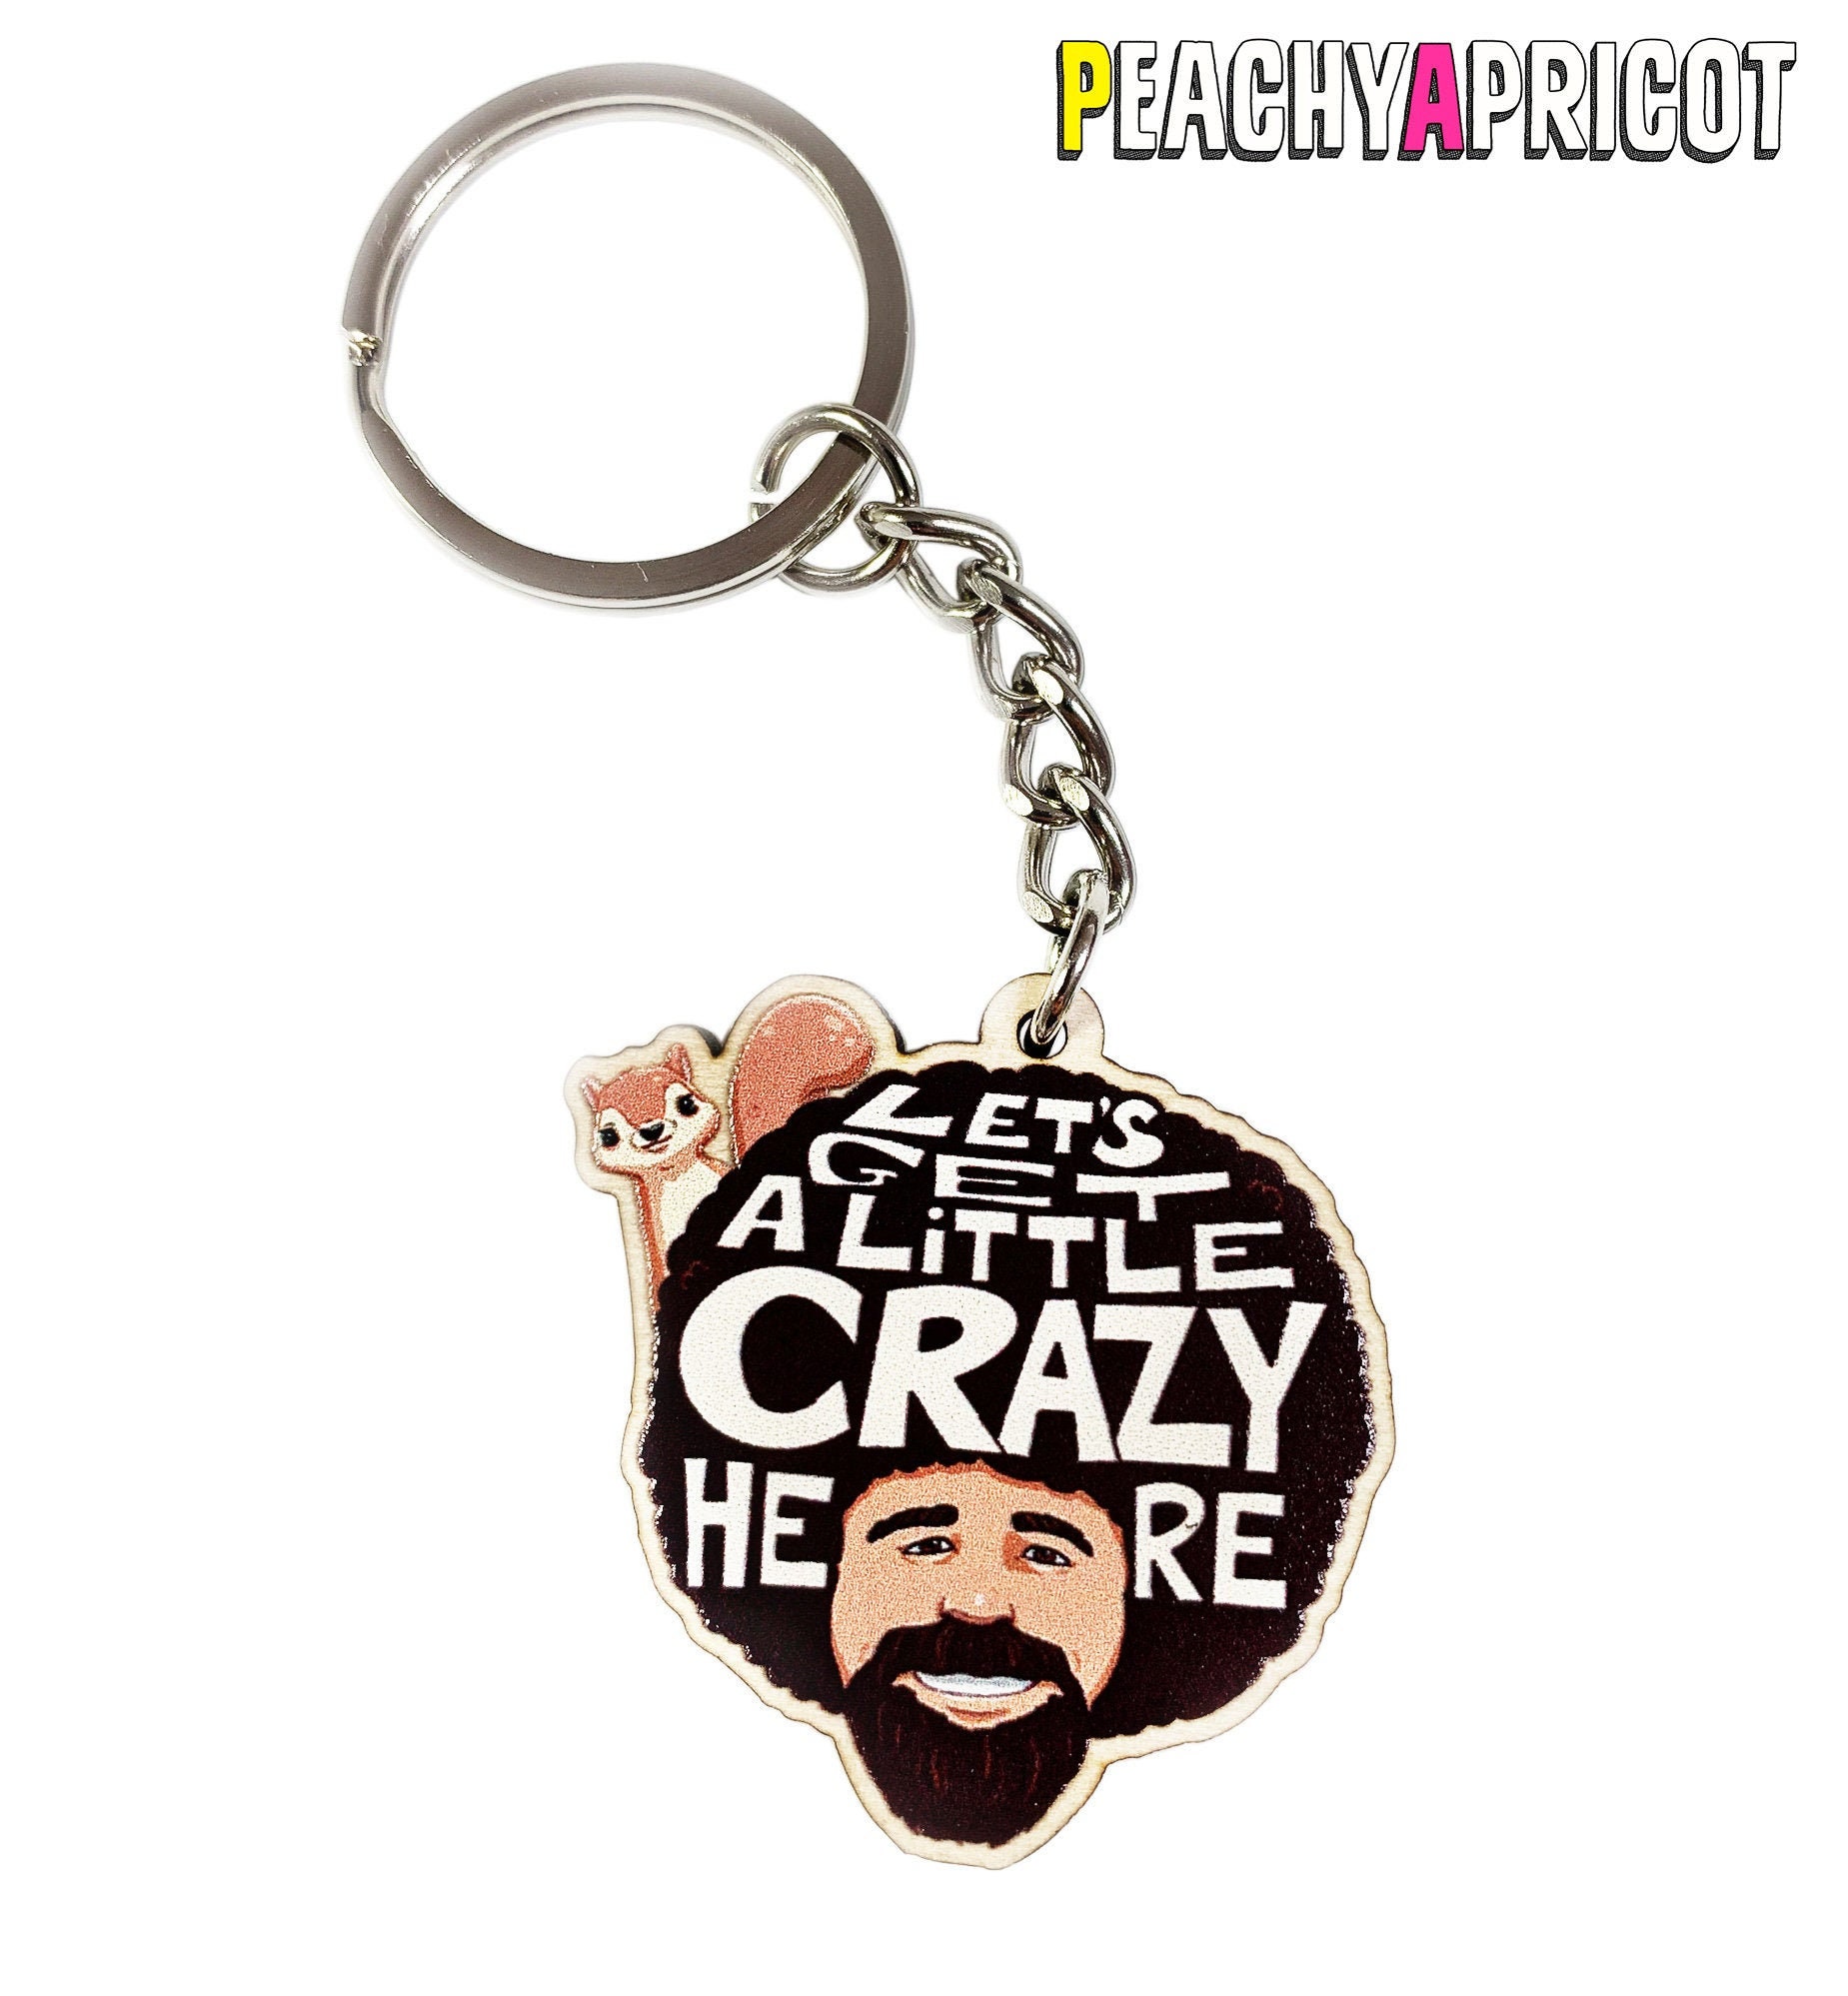  PeachyApricot Bob Ross Beat The Devil Car Coasters Pack of 2  Gifts Merch : Handmade Products